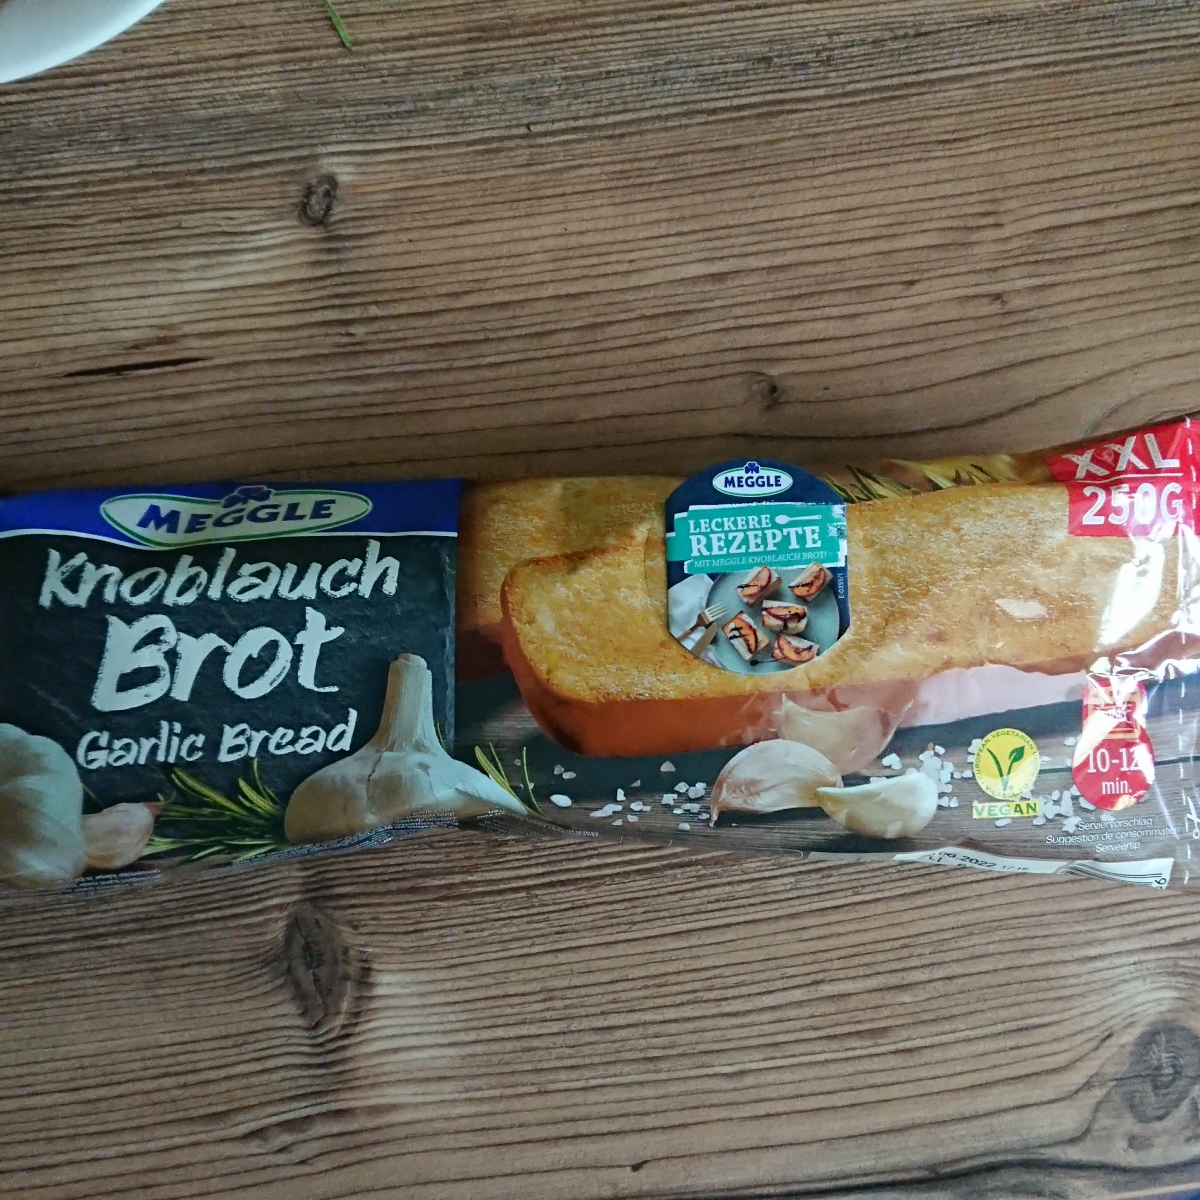 Meggle Knoblauch Brot | abillion Review